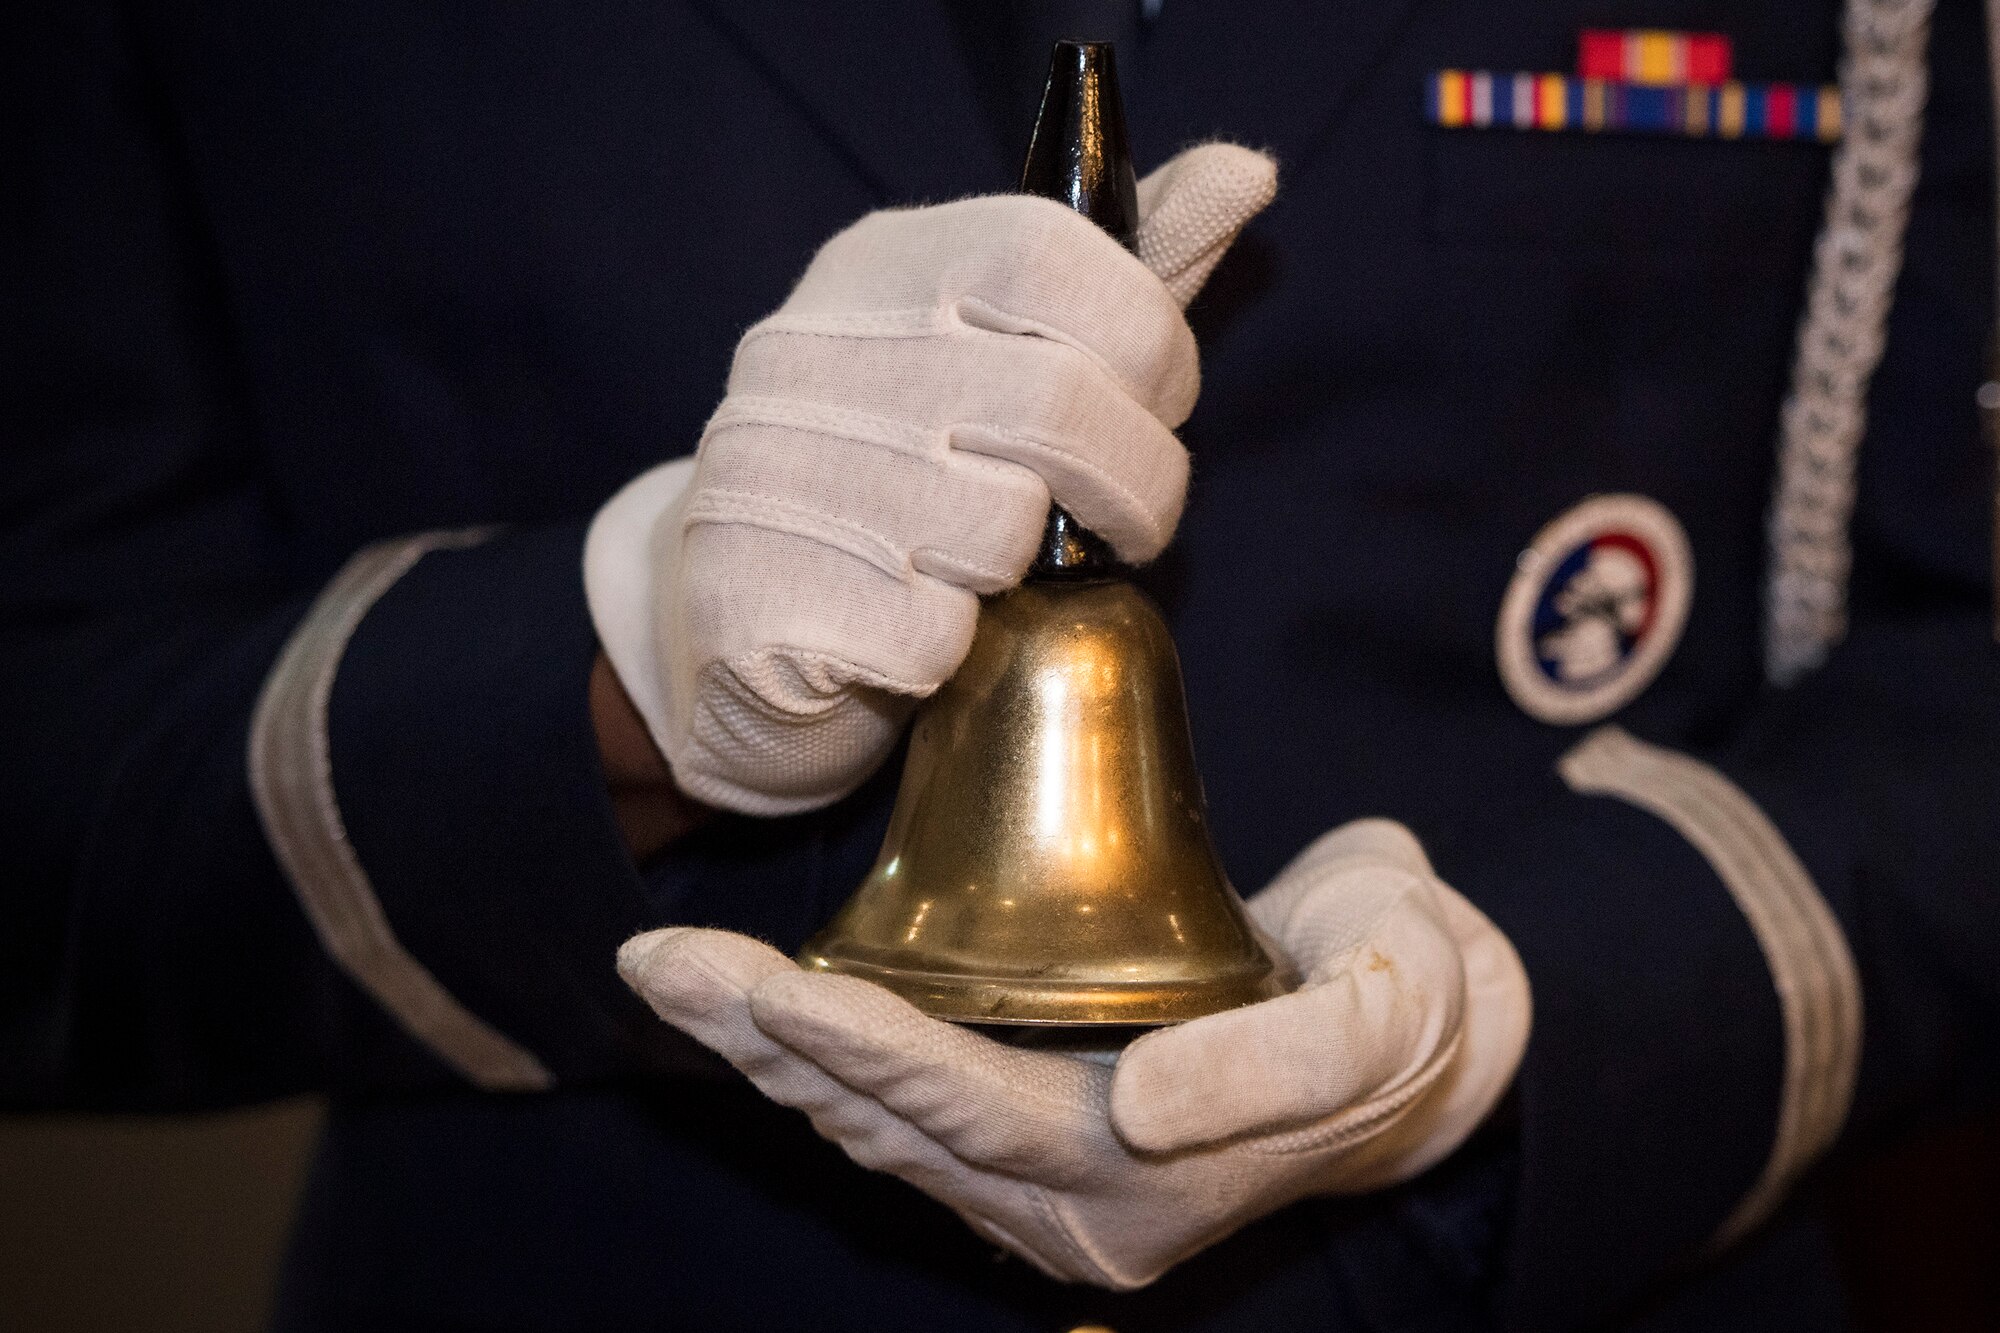 A ceremonial bell is seen during a 9/11 remembrance ceremony Sept. 11, 2019, at Incirlik Air Base, Turkey. The first set of rings represented the call to duty, the second set represented the completion of duty and the final set represented the members who are coming home. (U.S. Air Force photo by Staff Sgt. Ceaira Tinsley)